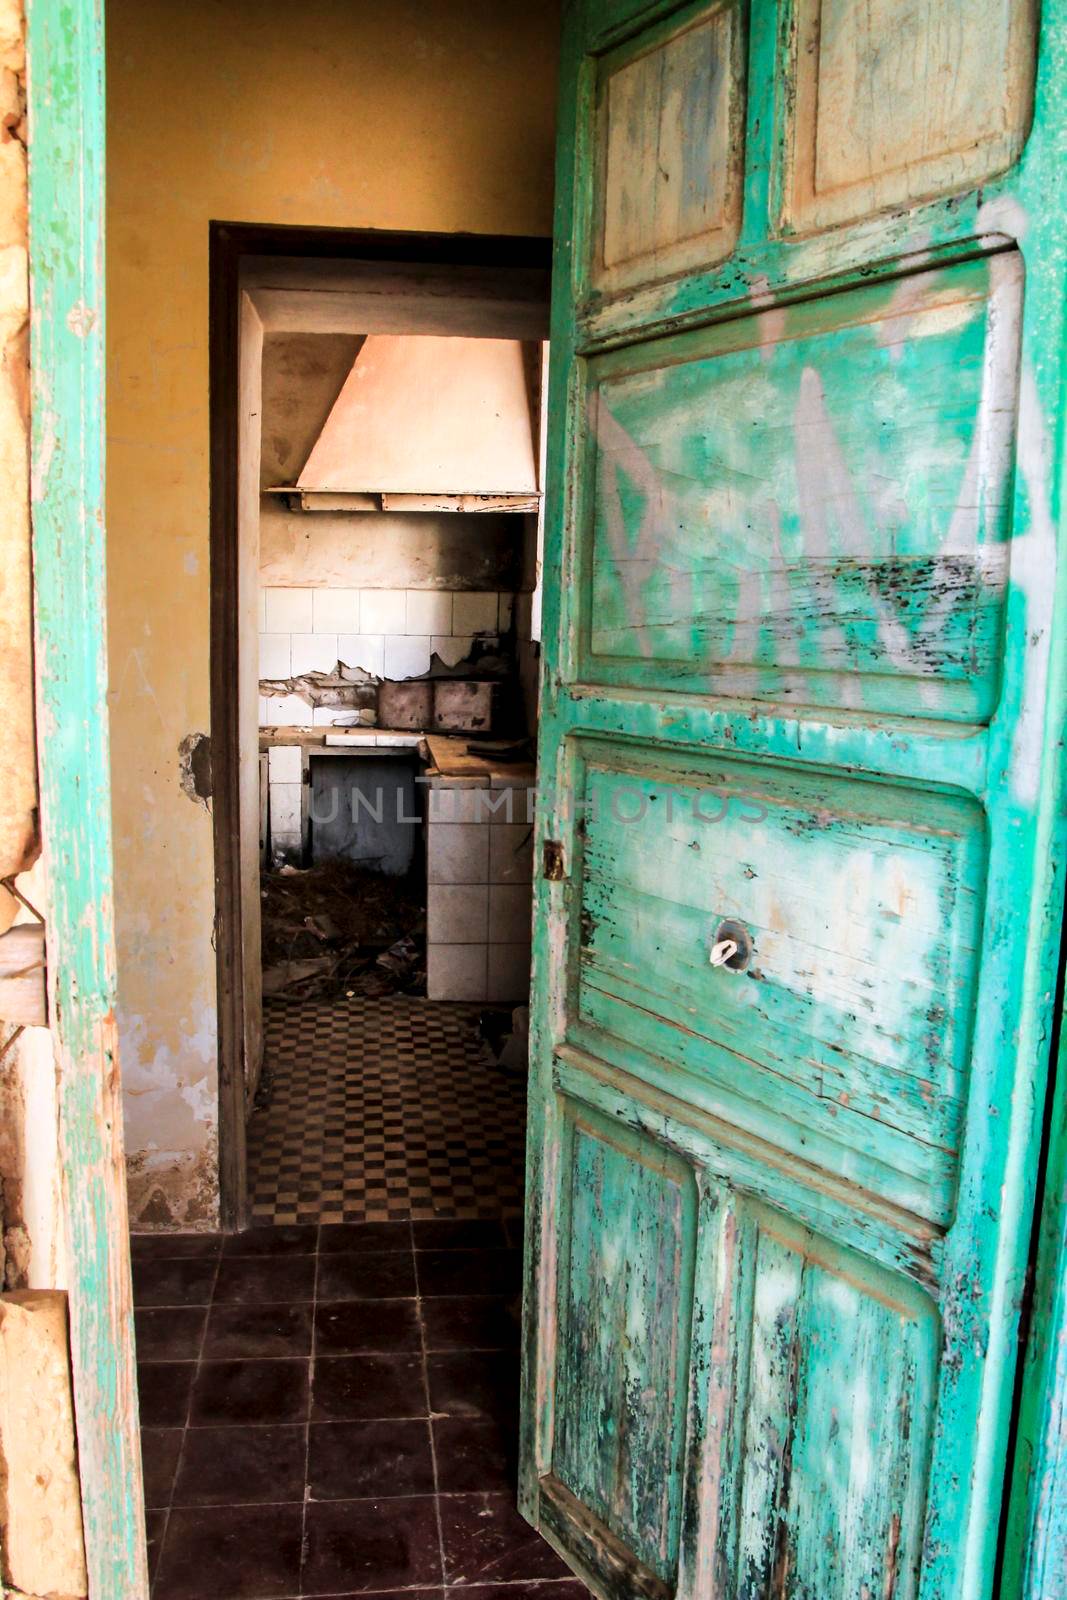 Remains of kitchen of abandoned building of the gold mines of Rodalquilar village in Almeria province, Spain.